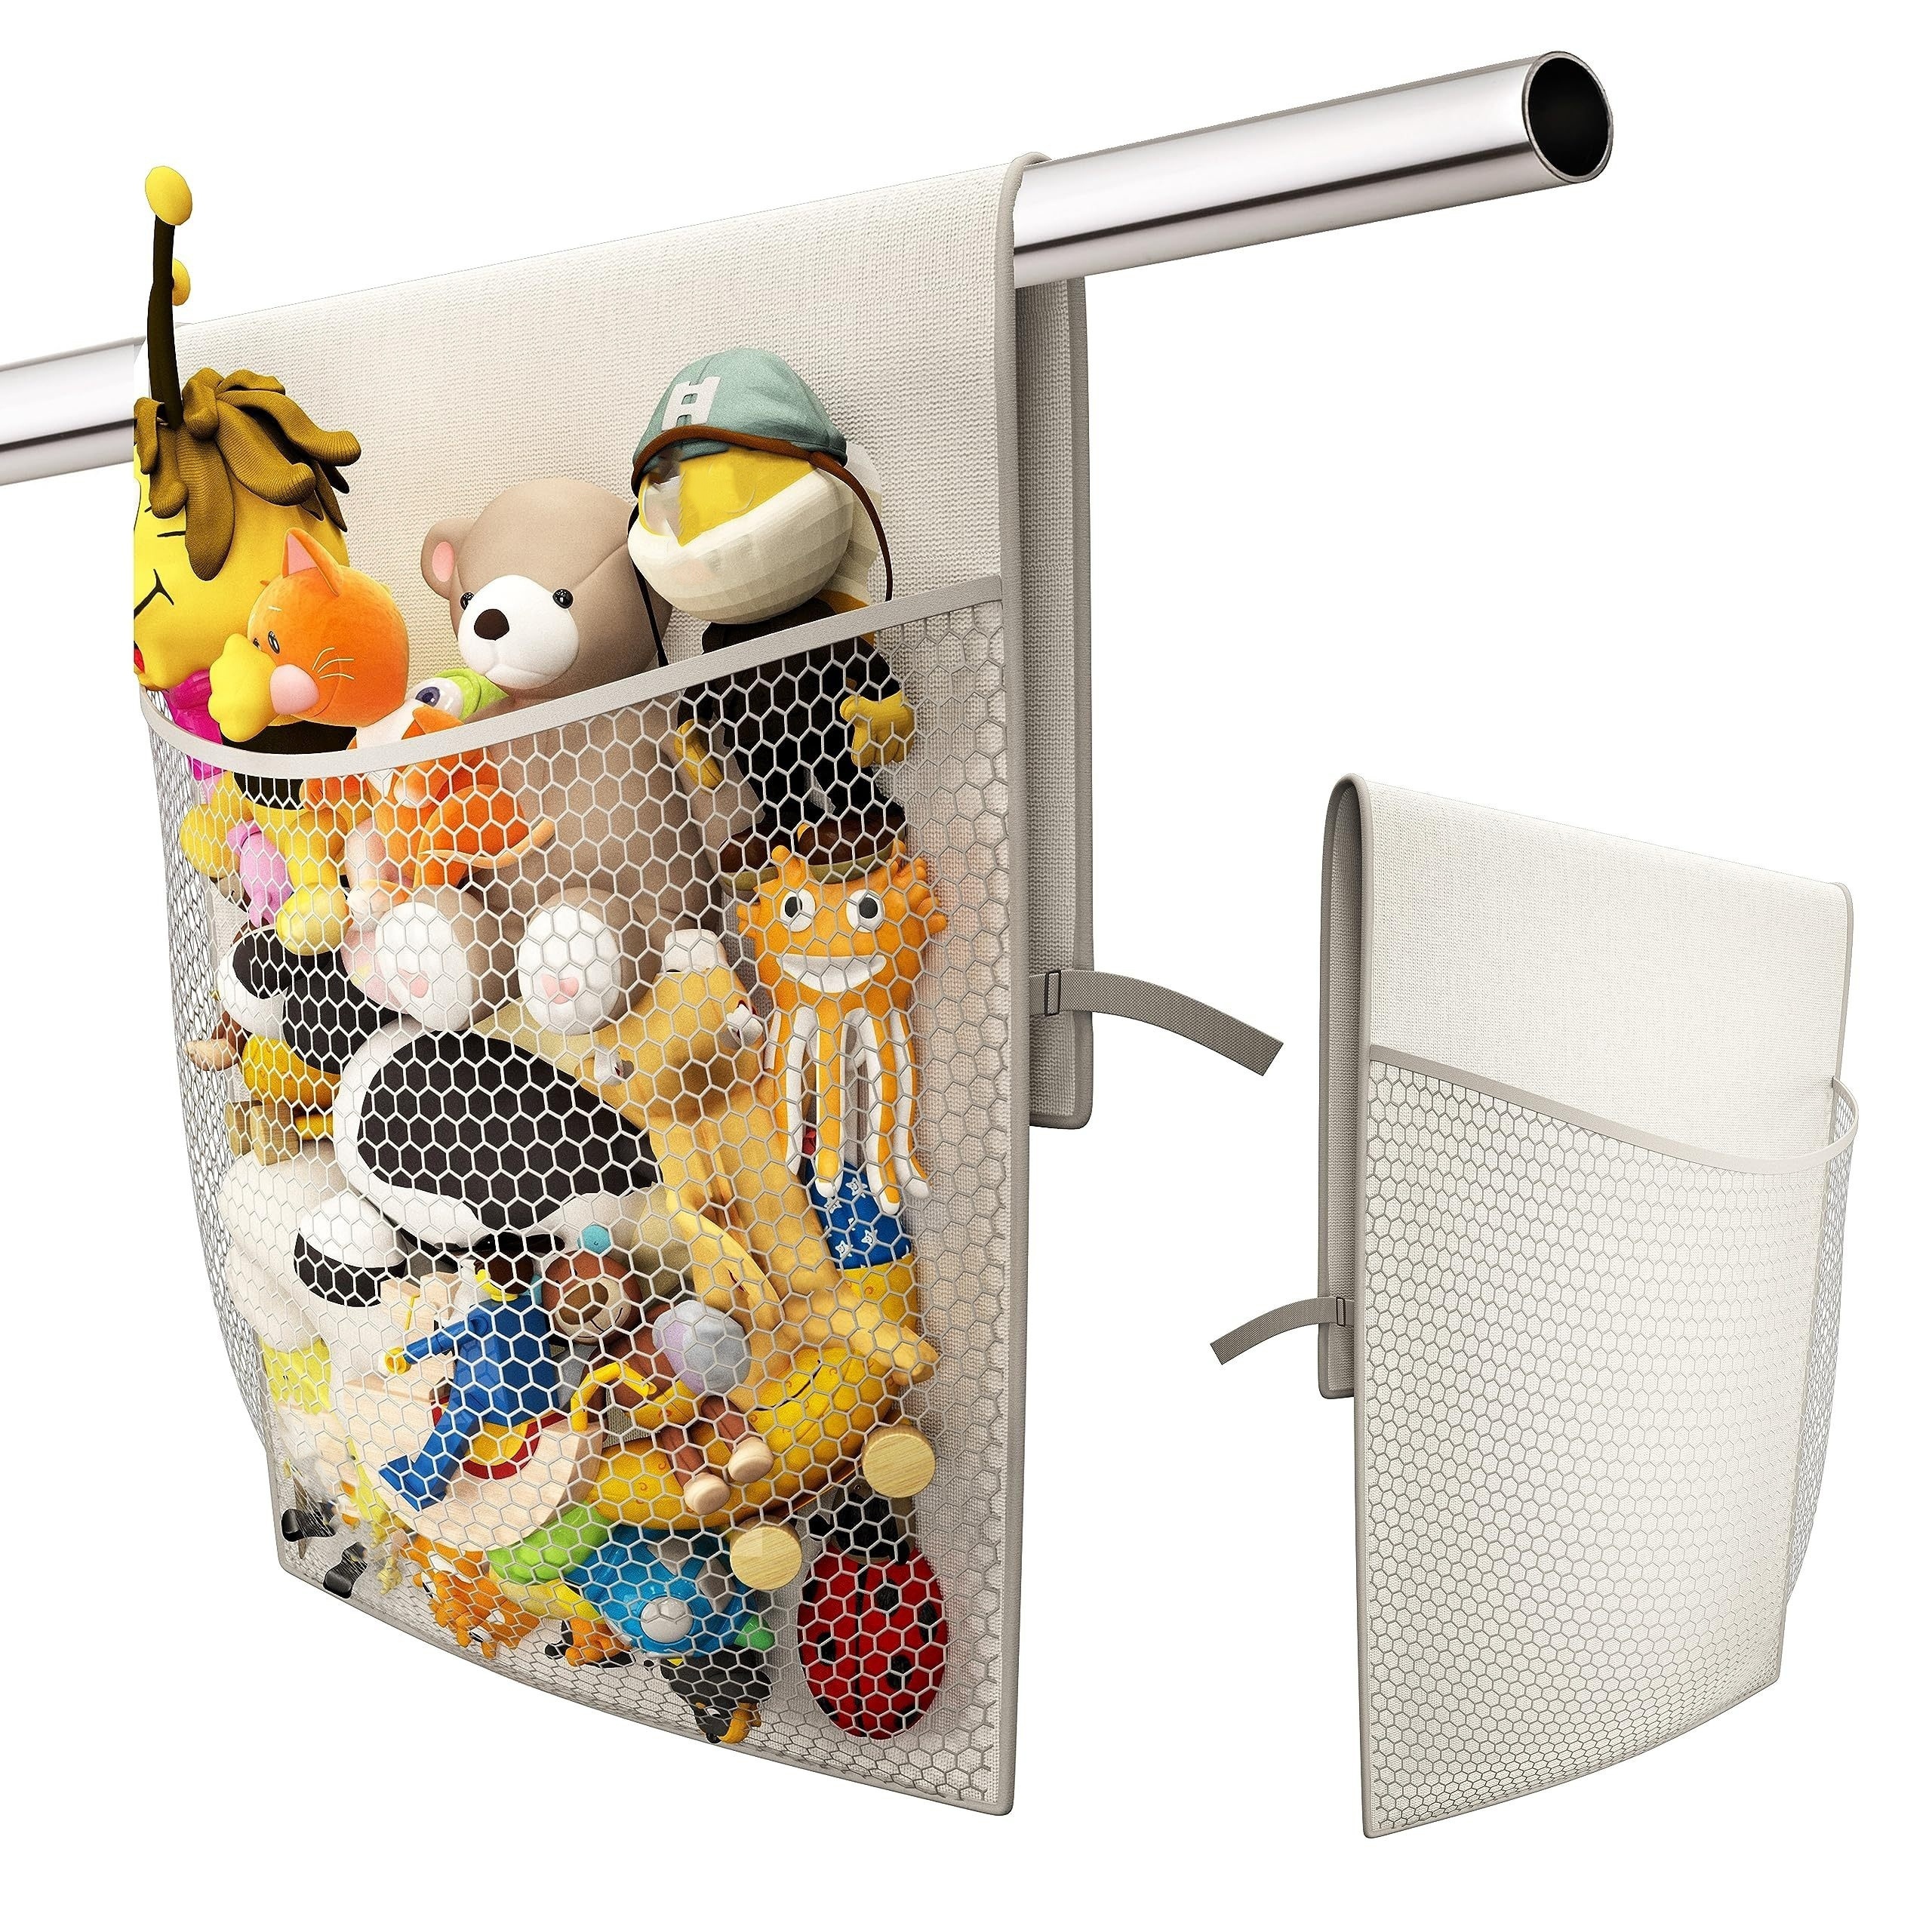 Storage for Stuffed Animal - Over Door Organizer for Stuffies